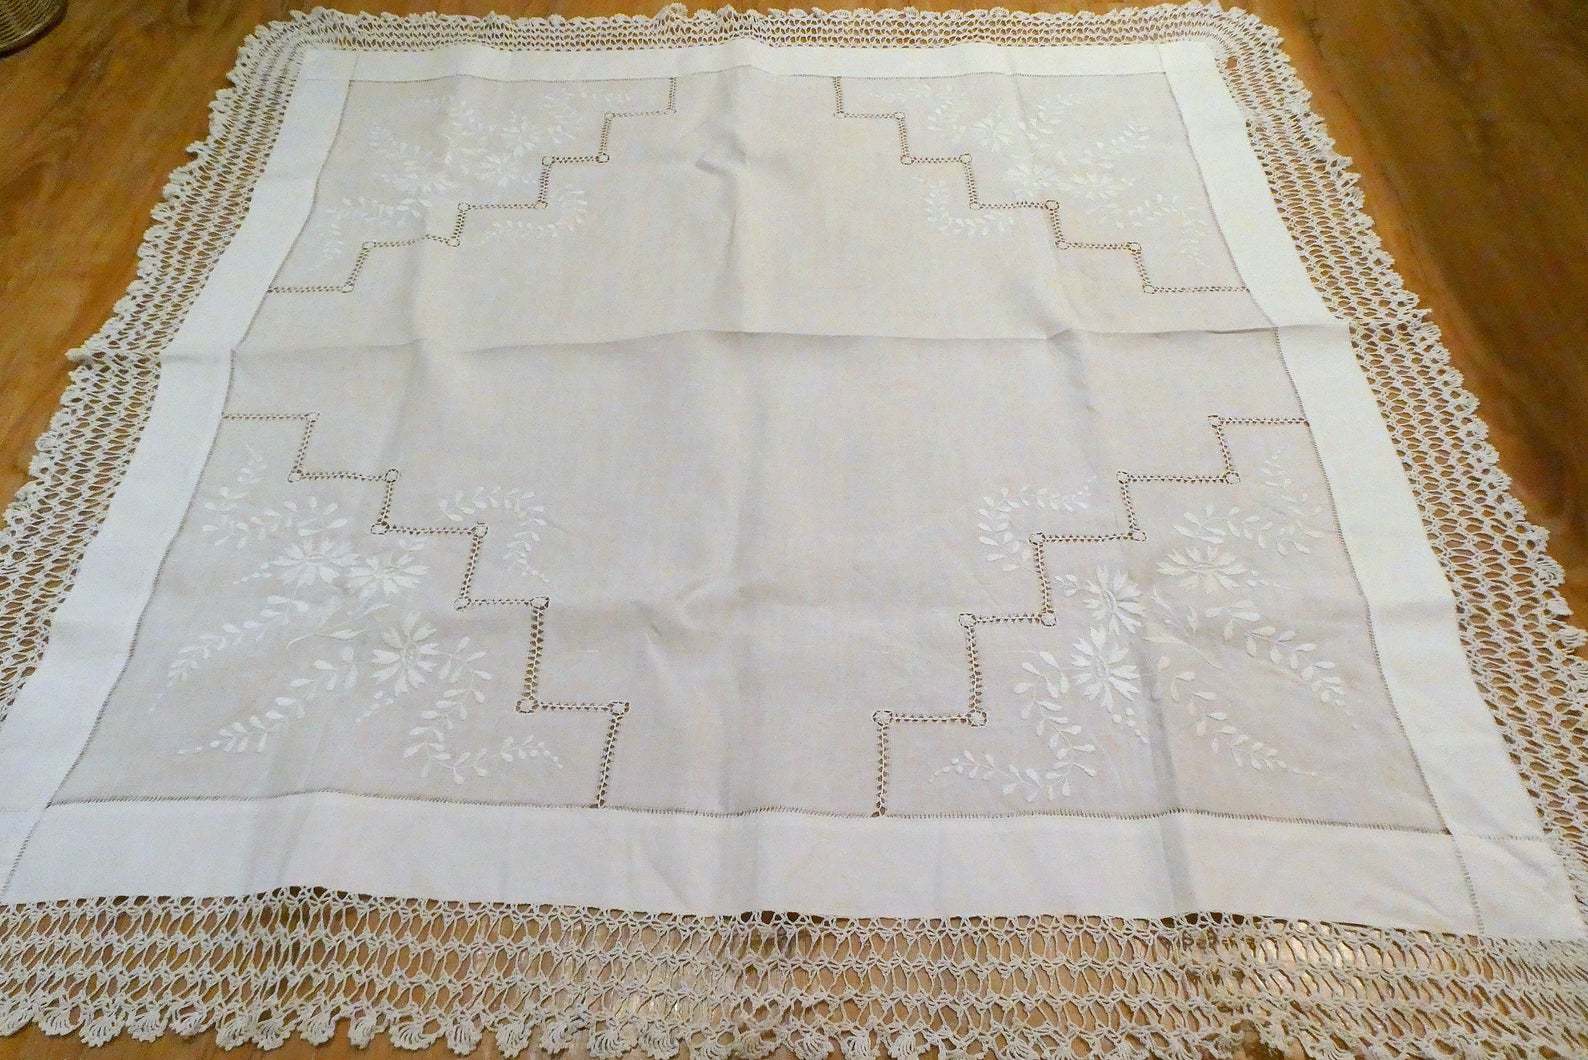 a vintage tablecloth spread out showing it's inticate geometric cutwork detailing